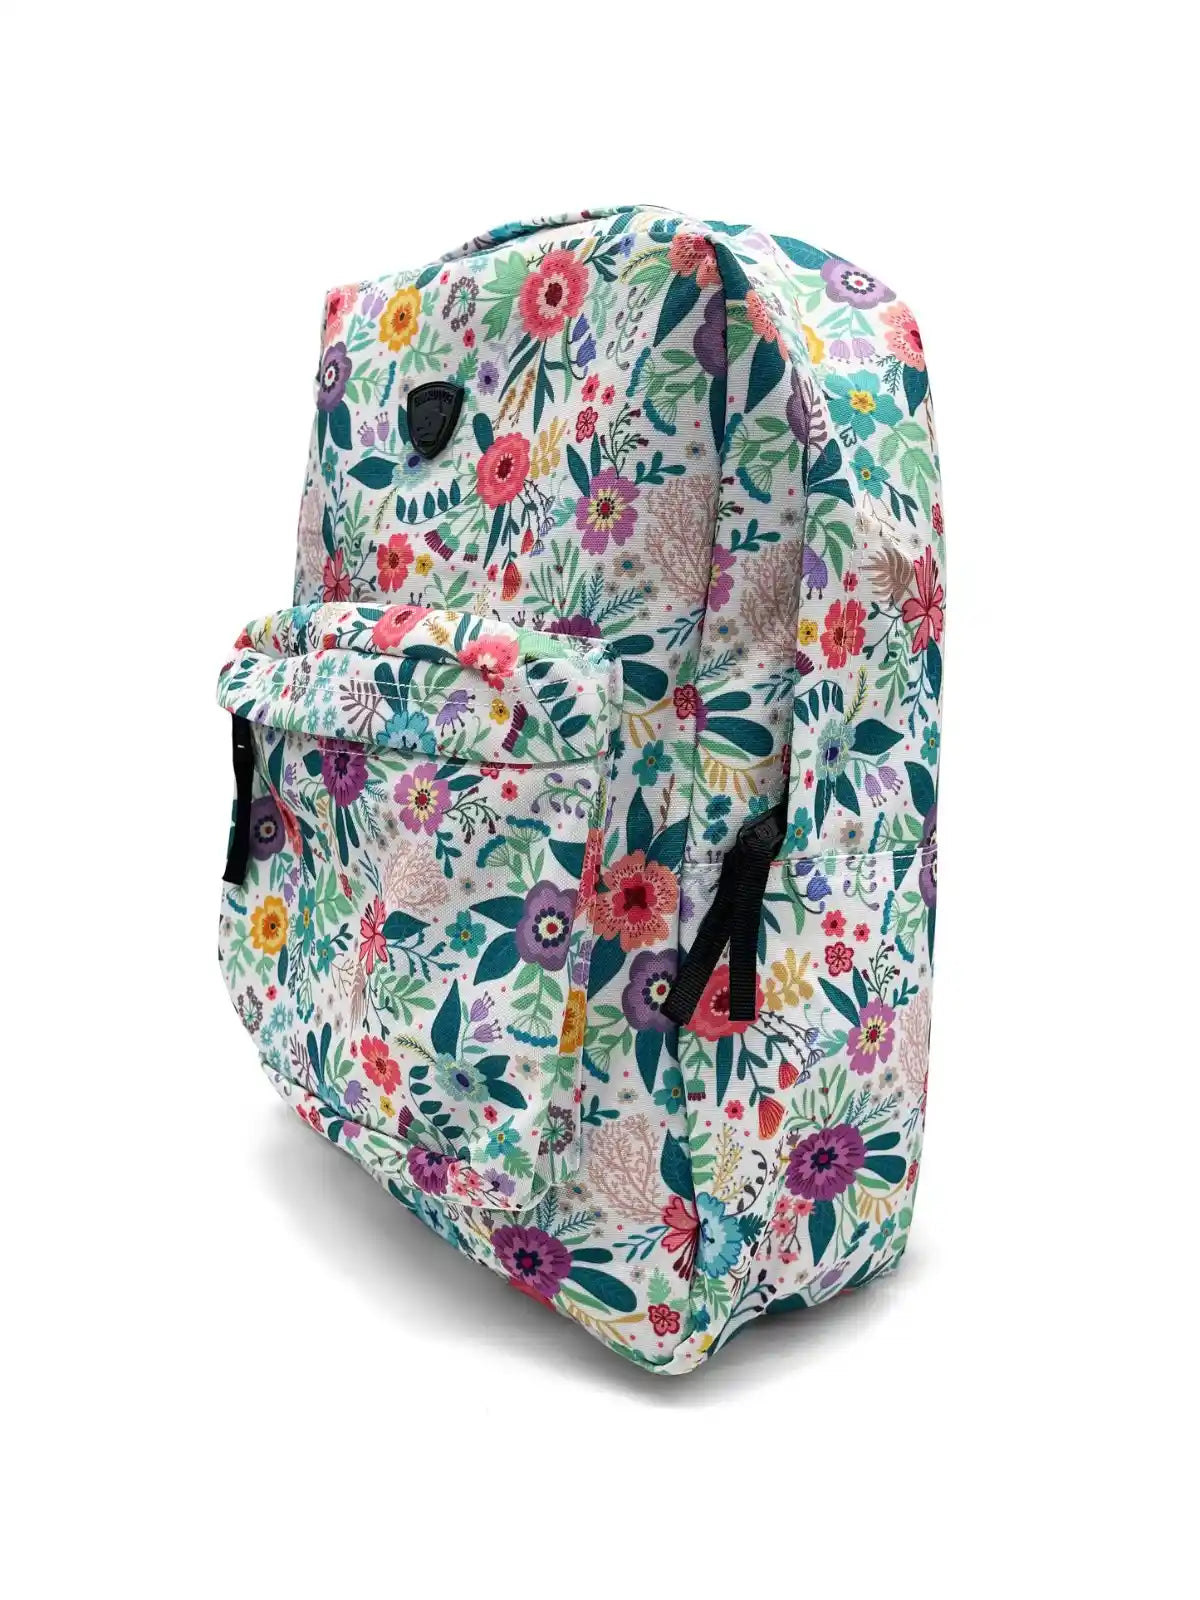 Bulletproof BackpackGuard Dog Security Proshield Scout Floral | Youth Edition